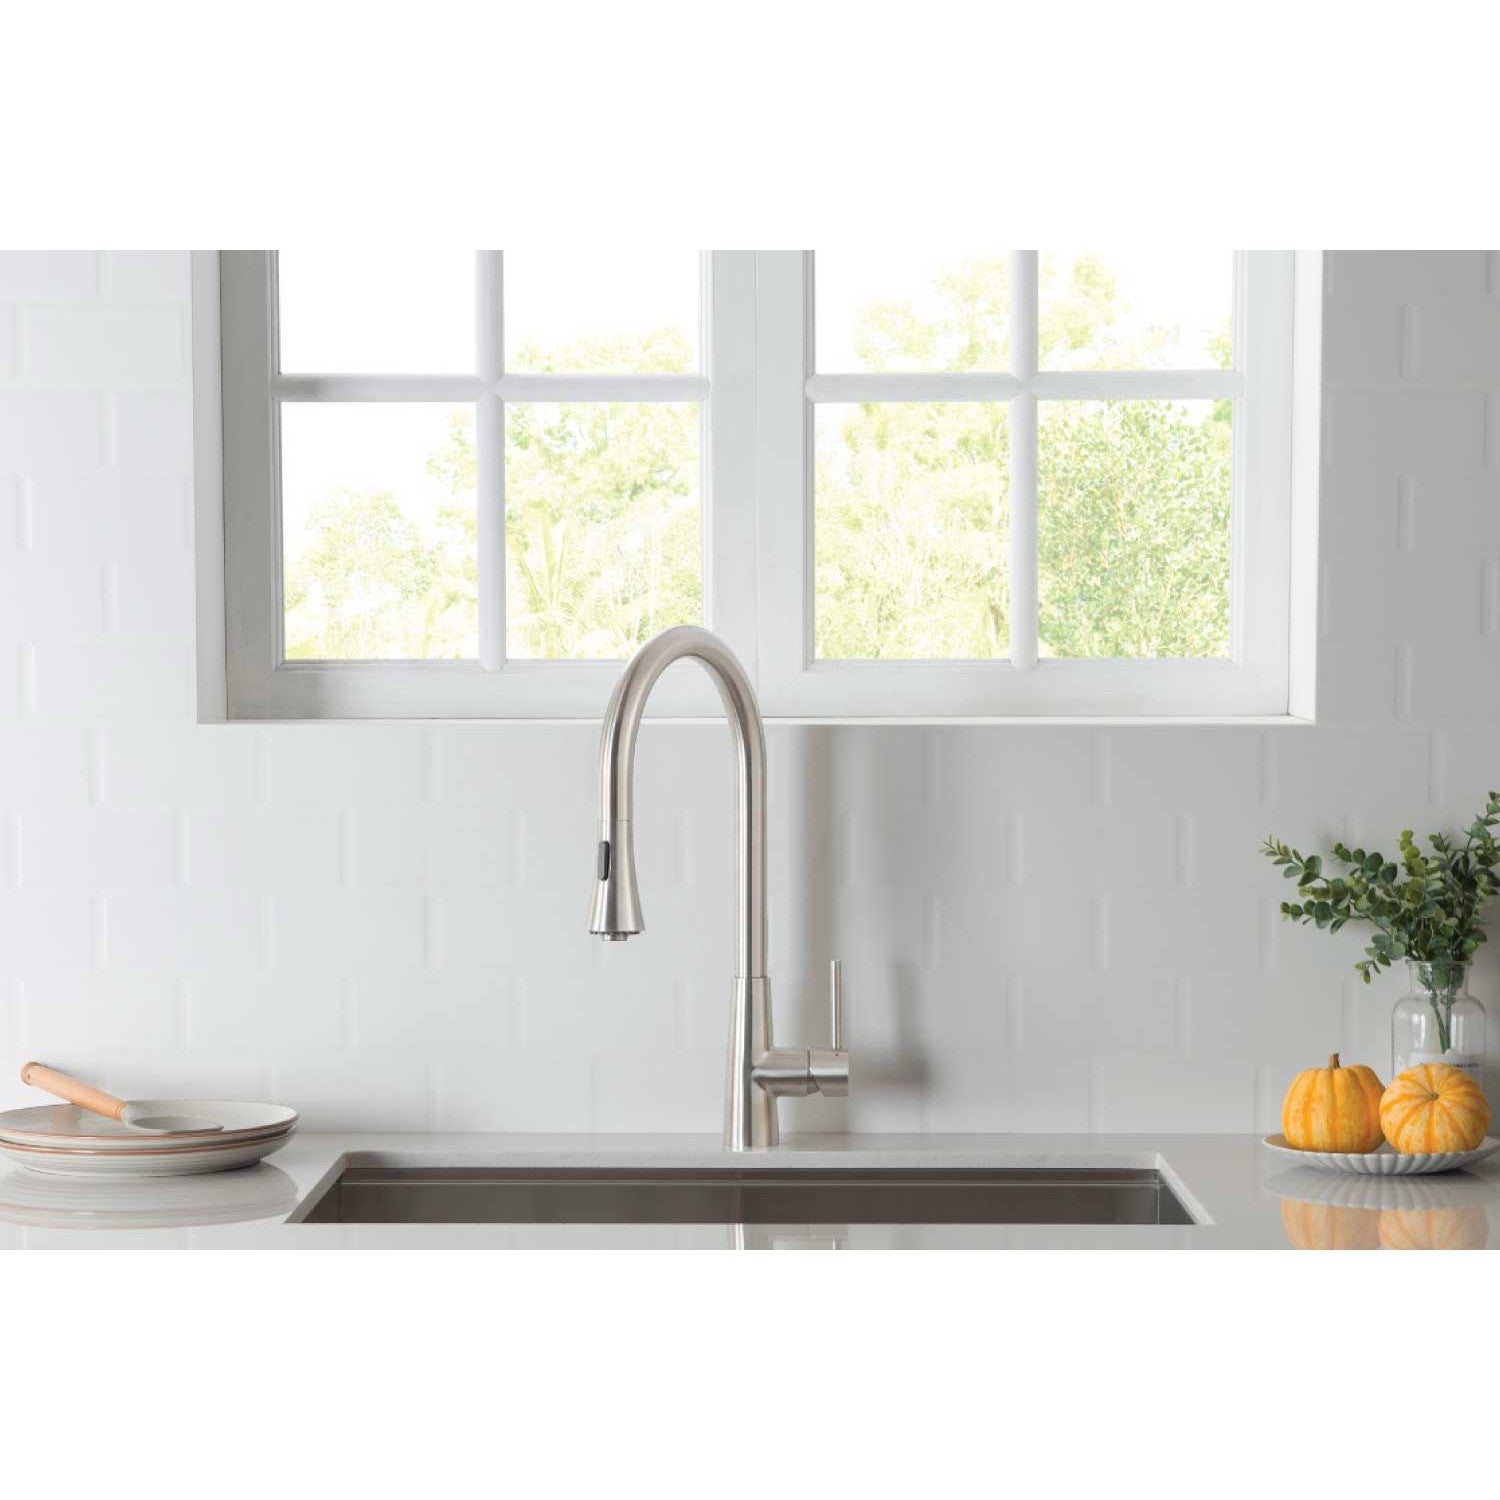 Isenberg Klassiker Zest 18" Single Hole Leaf Green Stainless Steel Pull-Down Kitchen Faucet With Dual Function Sprayer